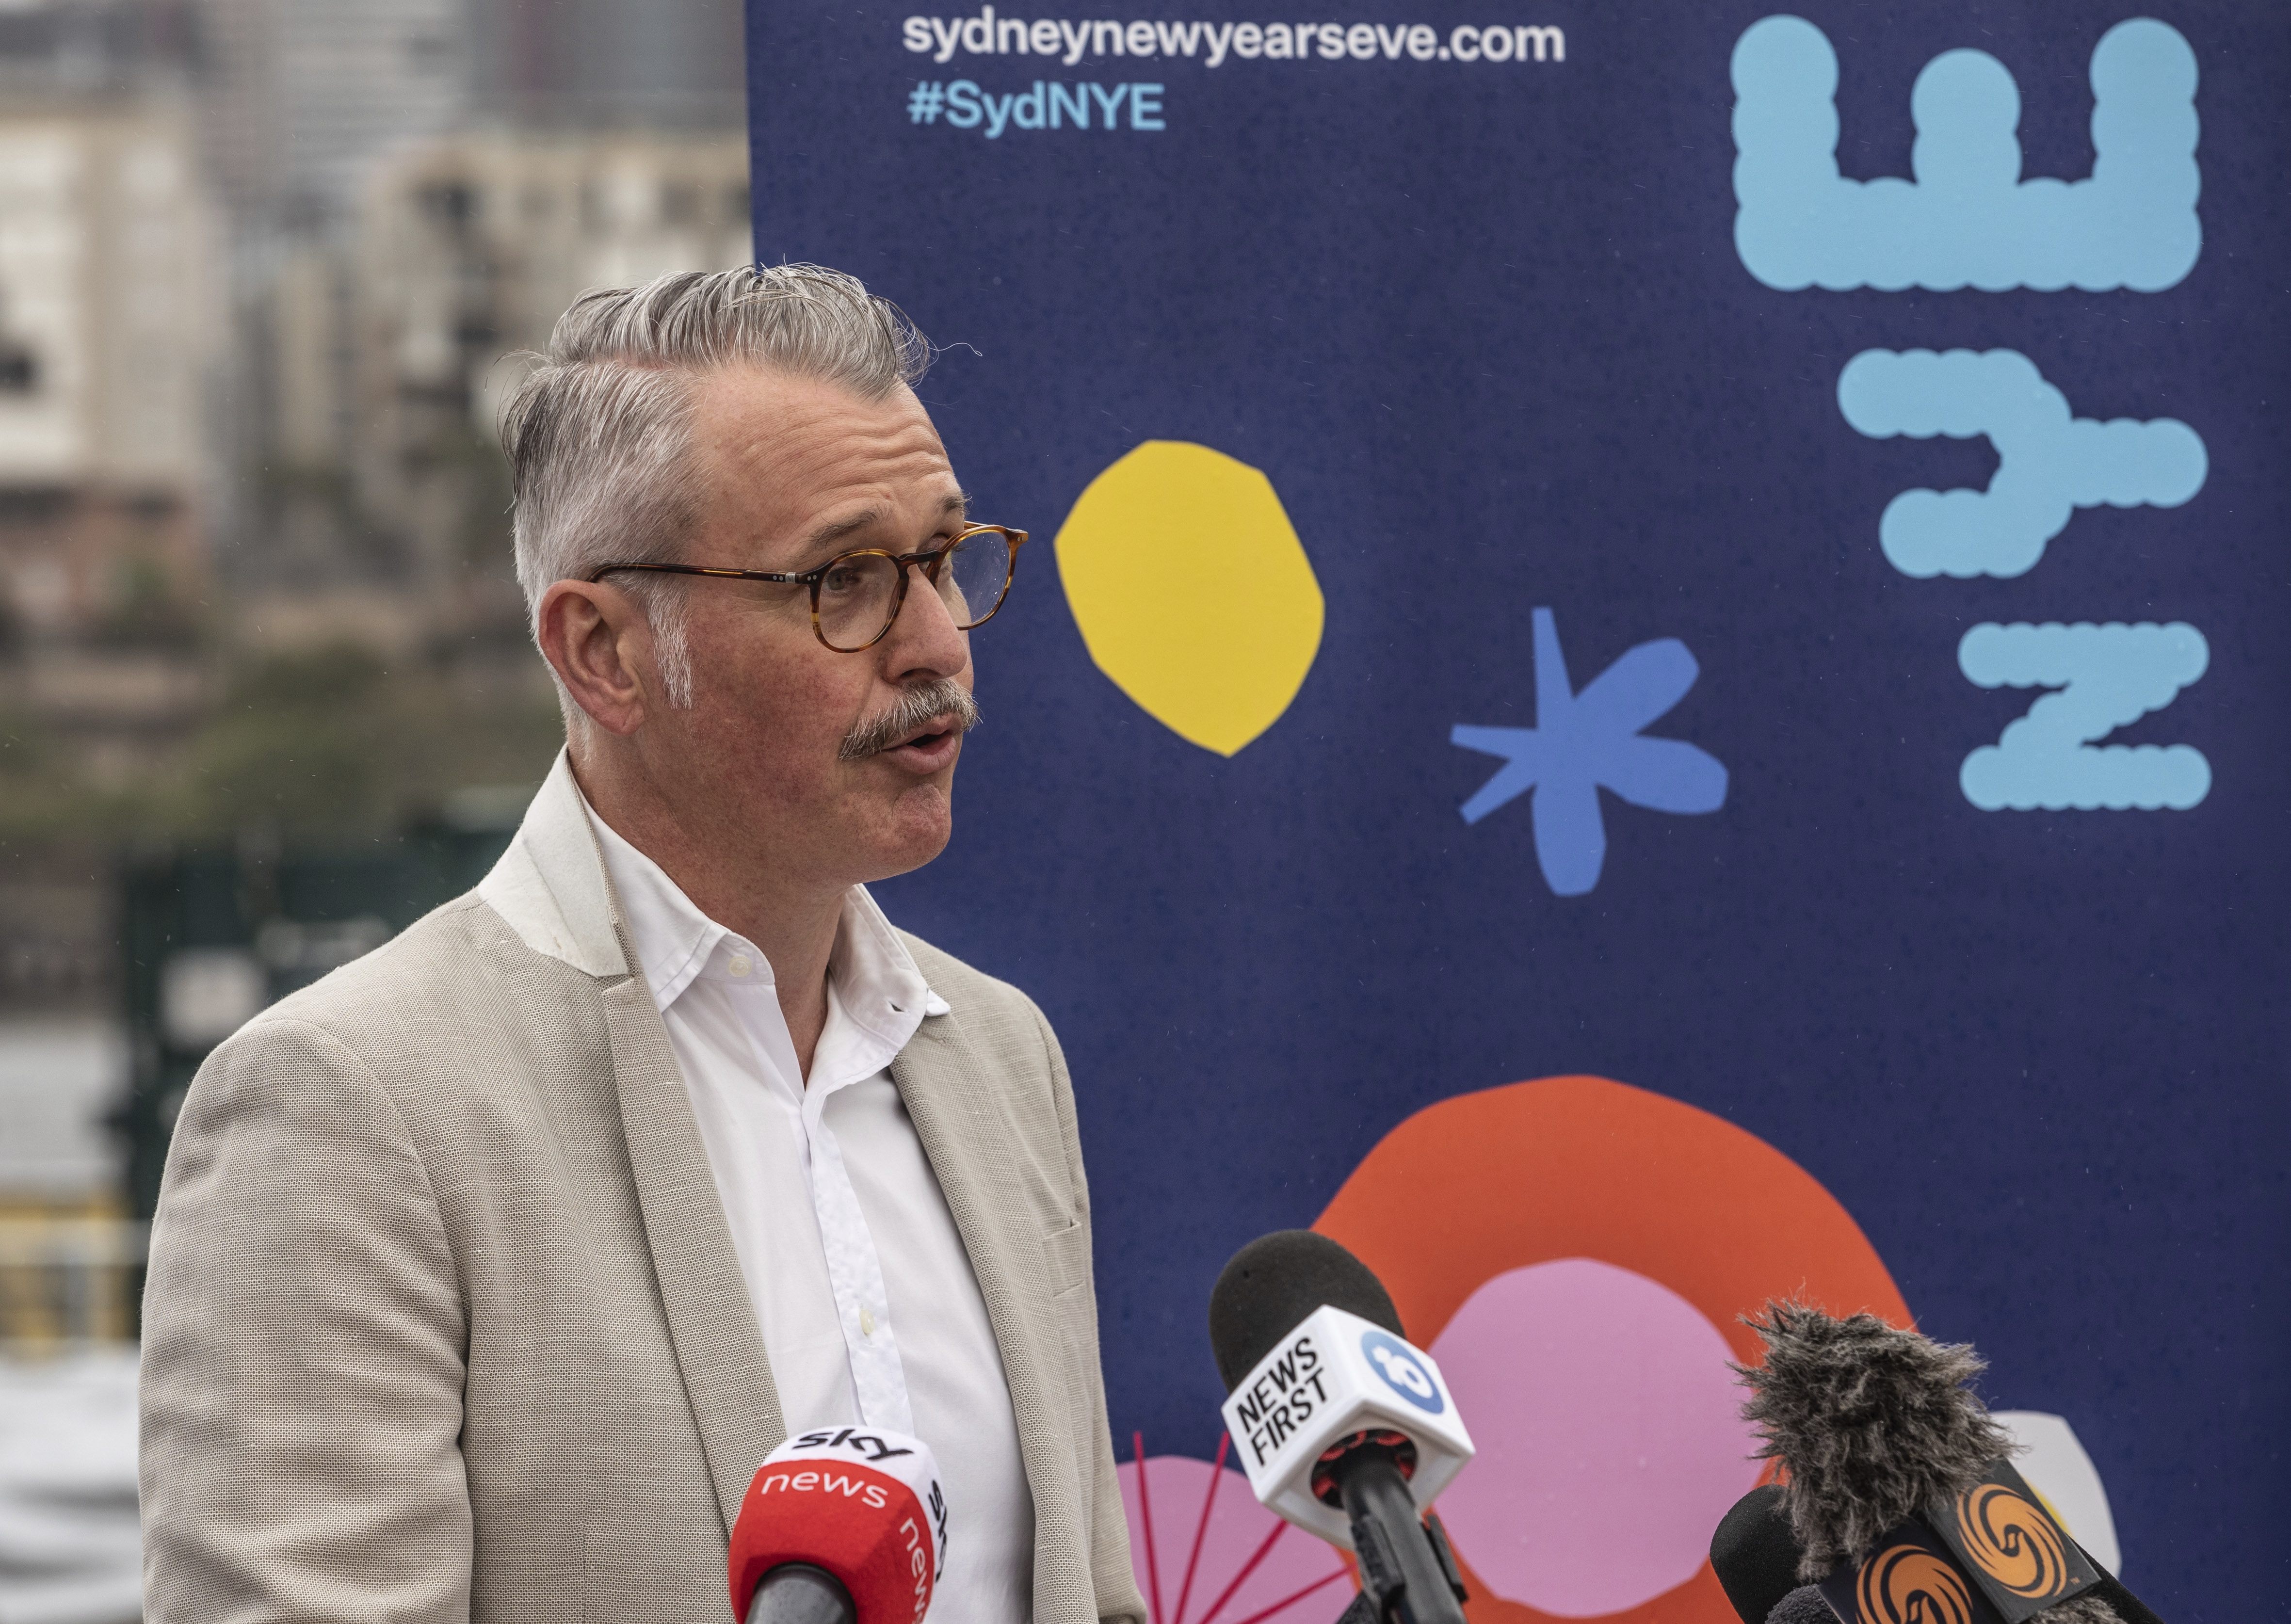 City of Sydney Program Manager, Stephen Gilby speaks at the media event for the 2021 NYE Fireworks display at Glebe Island in Sydney, on Wednesday, December 29, 2021. Photo by Cole Bennetts.